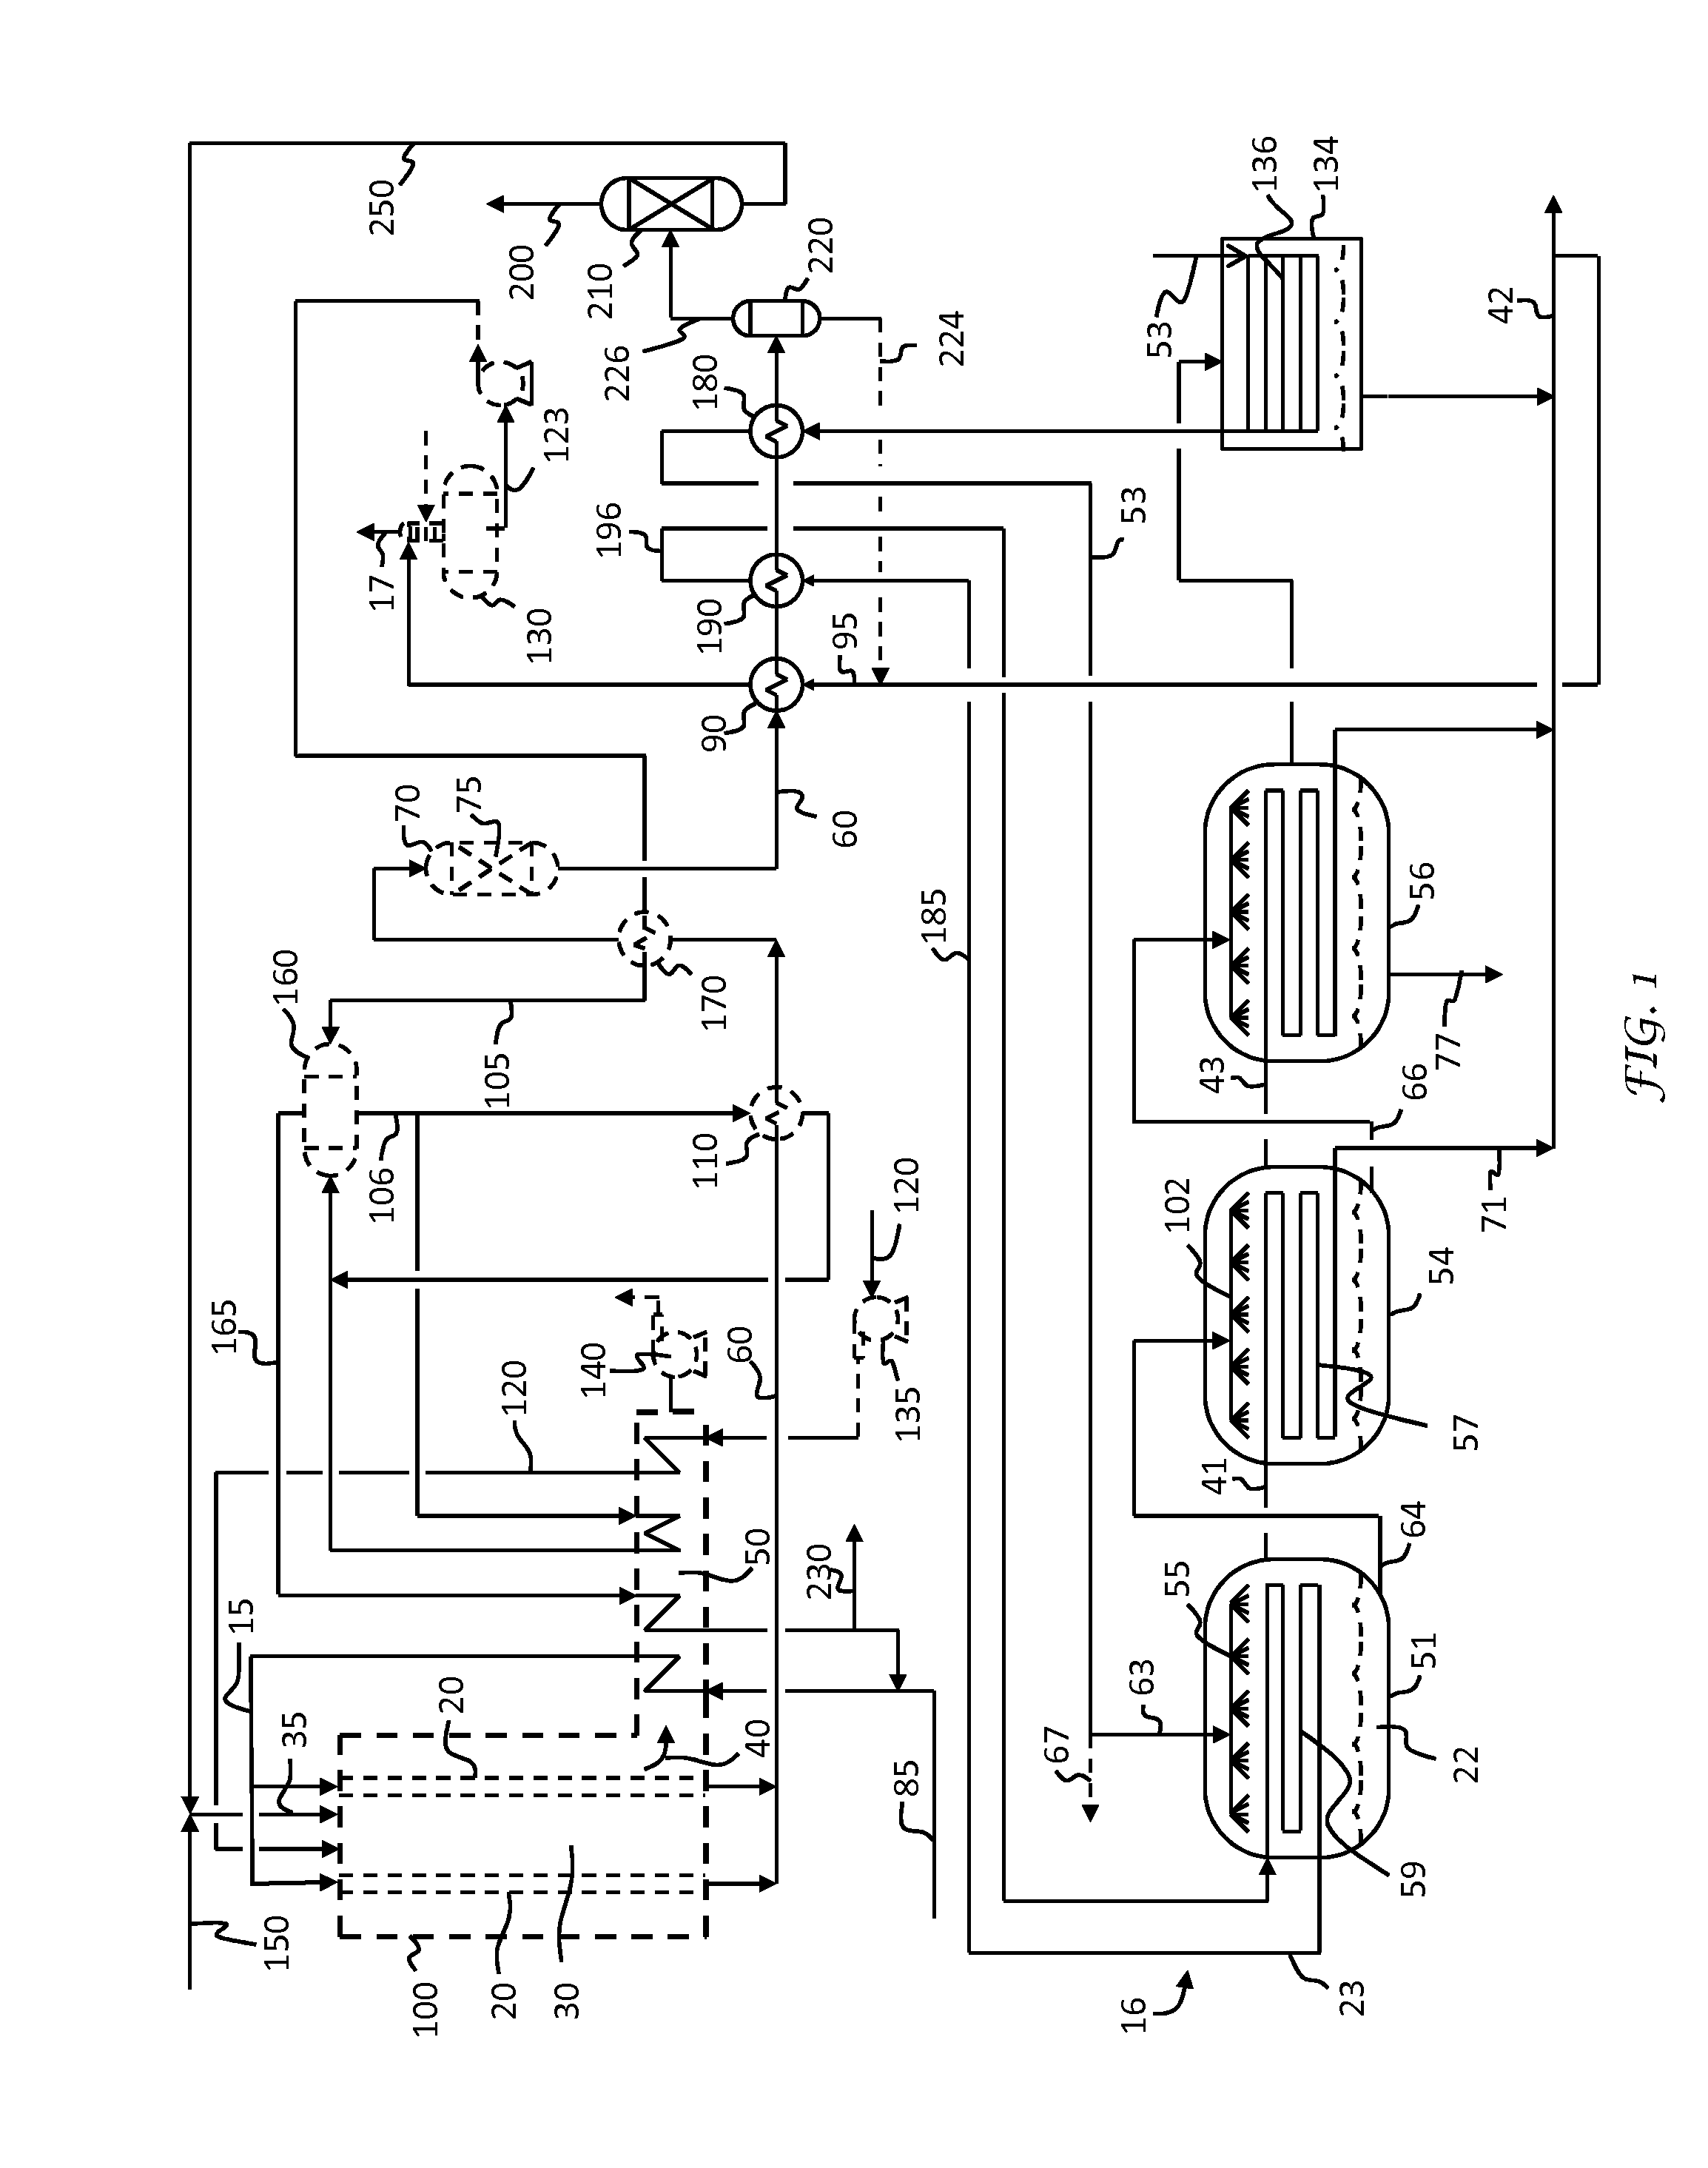 System and Process for Producing a H2-Containing Gas and Purified Water